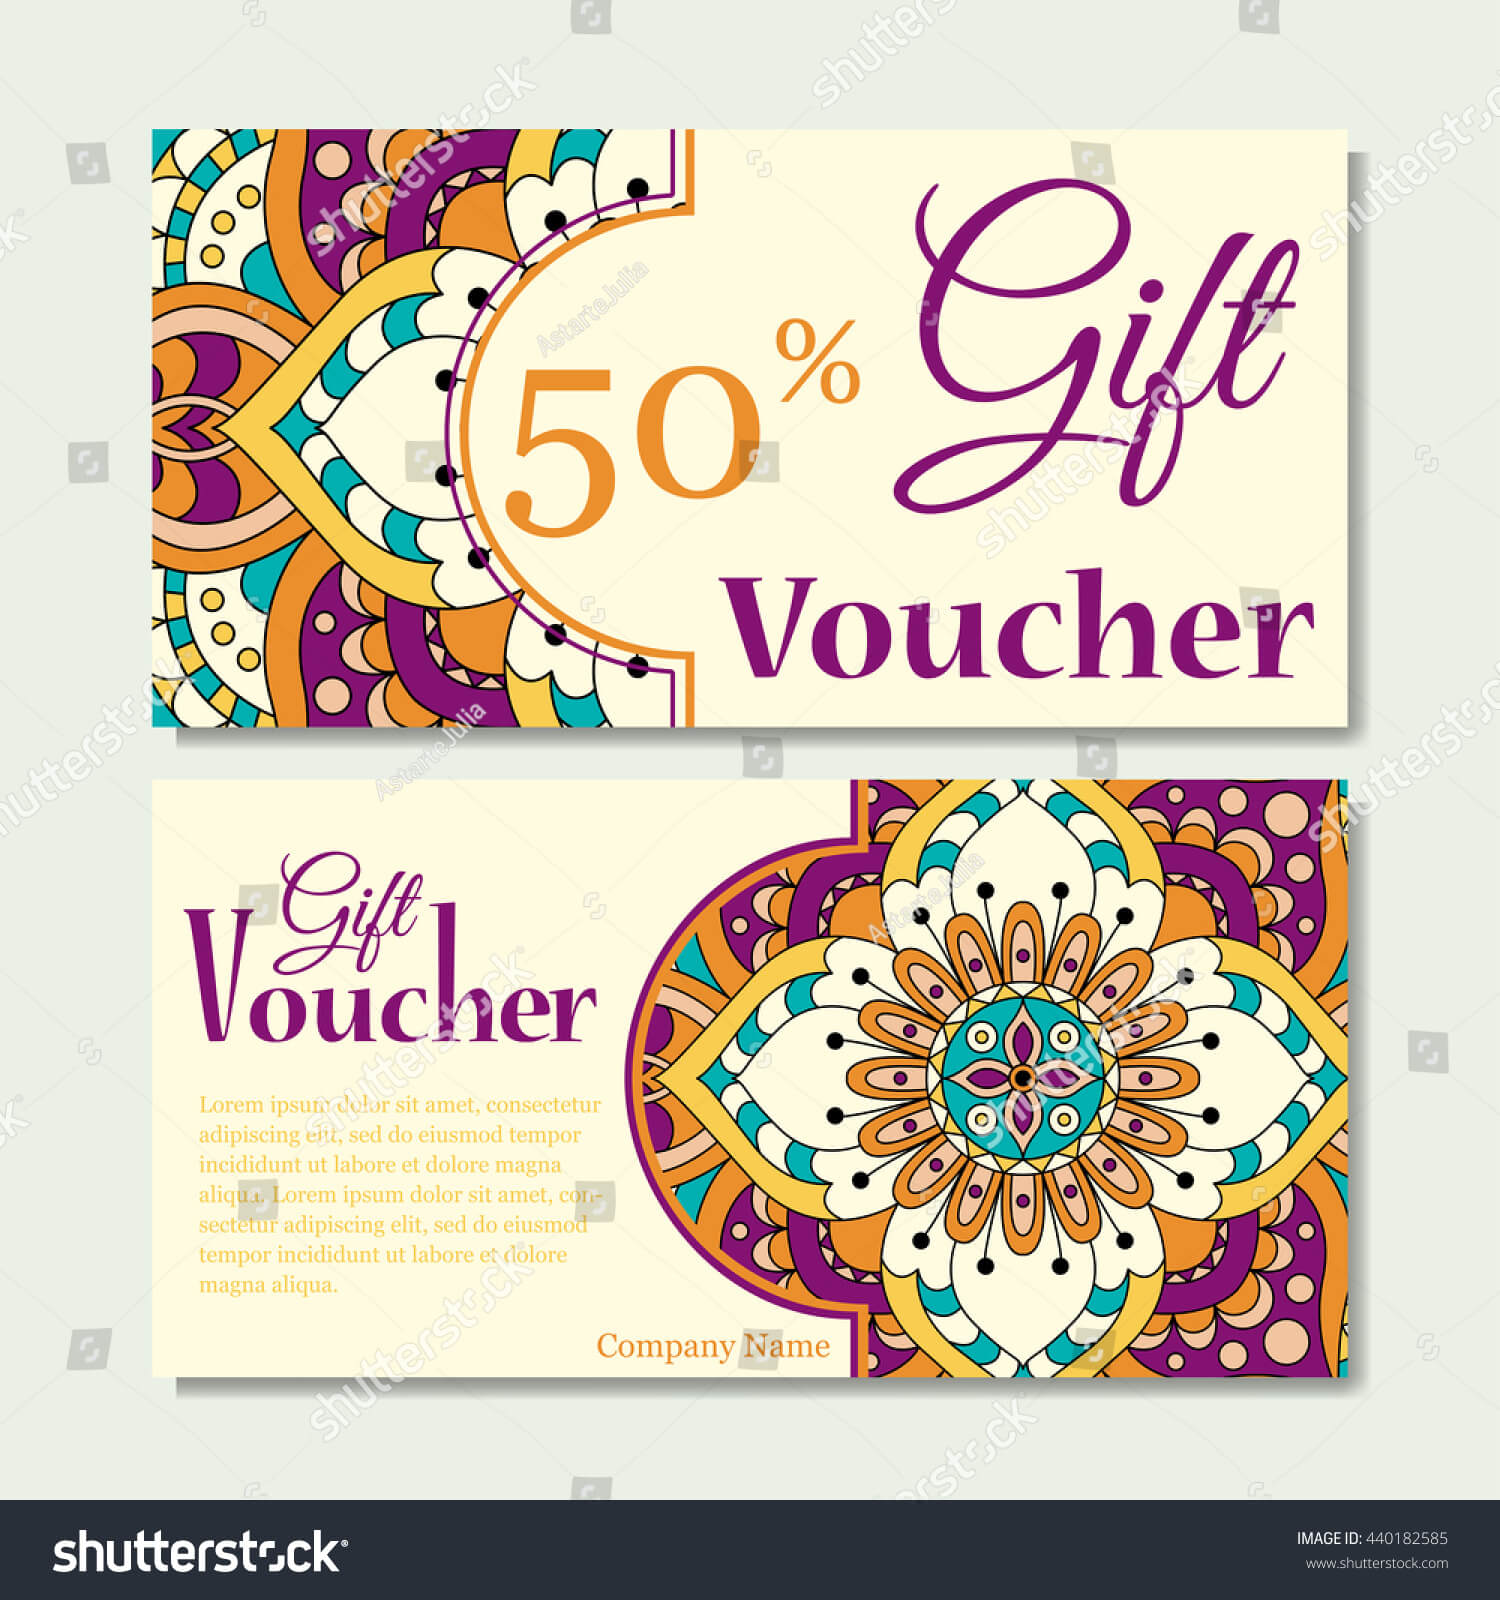 Gift Voucher Template Mandala Design Certificate Stock Pertaining To Magazine Subscription Gift Certificate Template